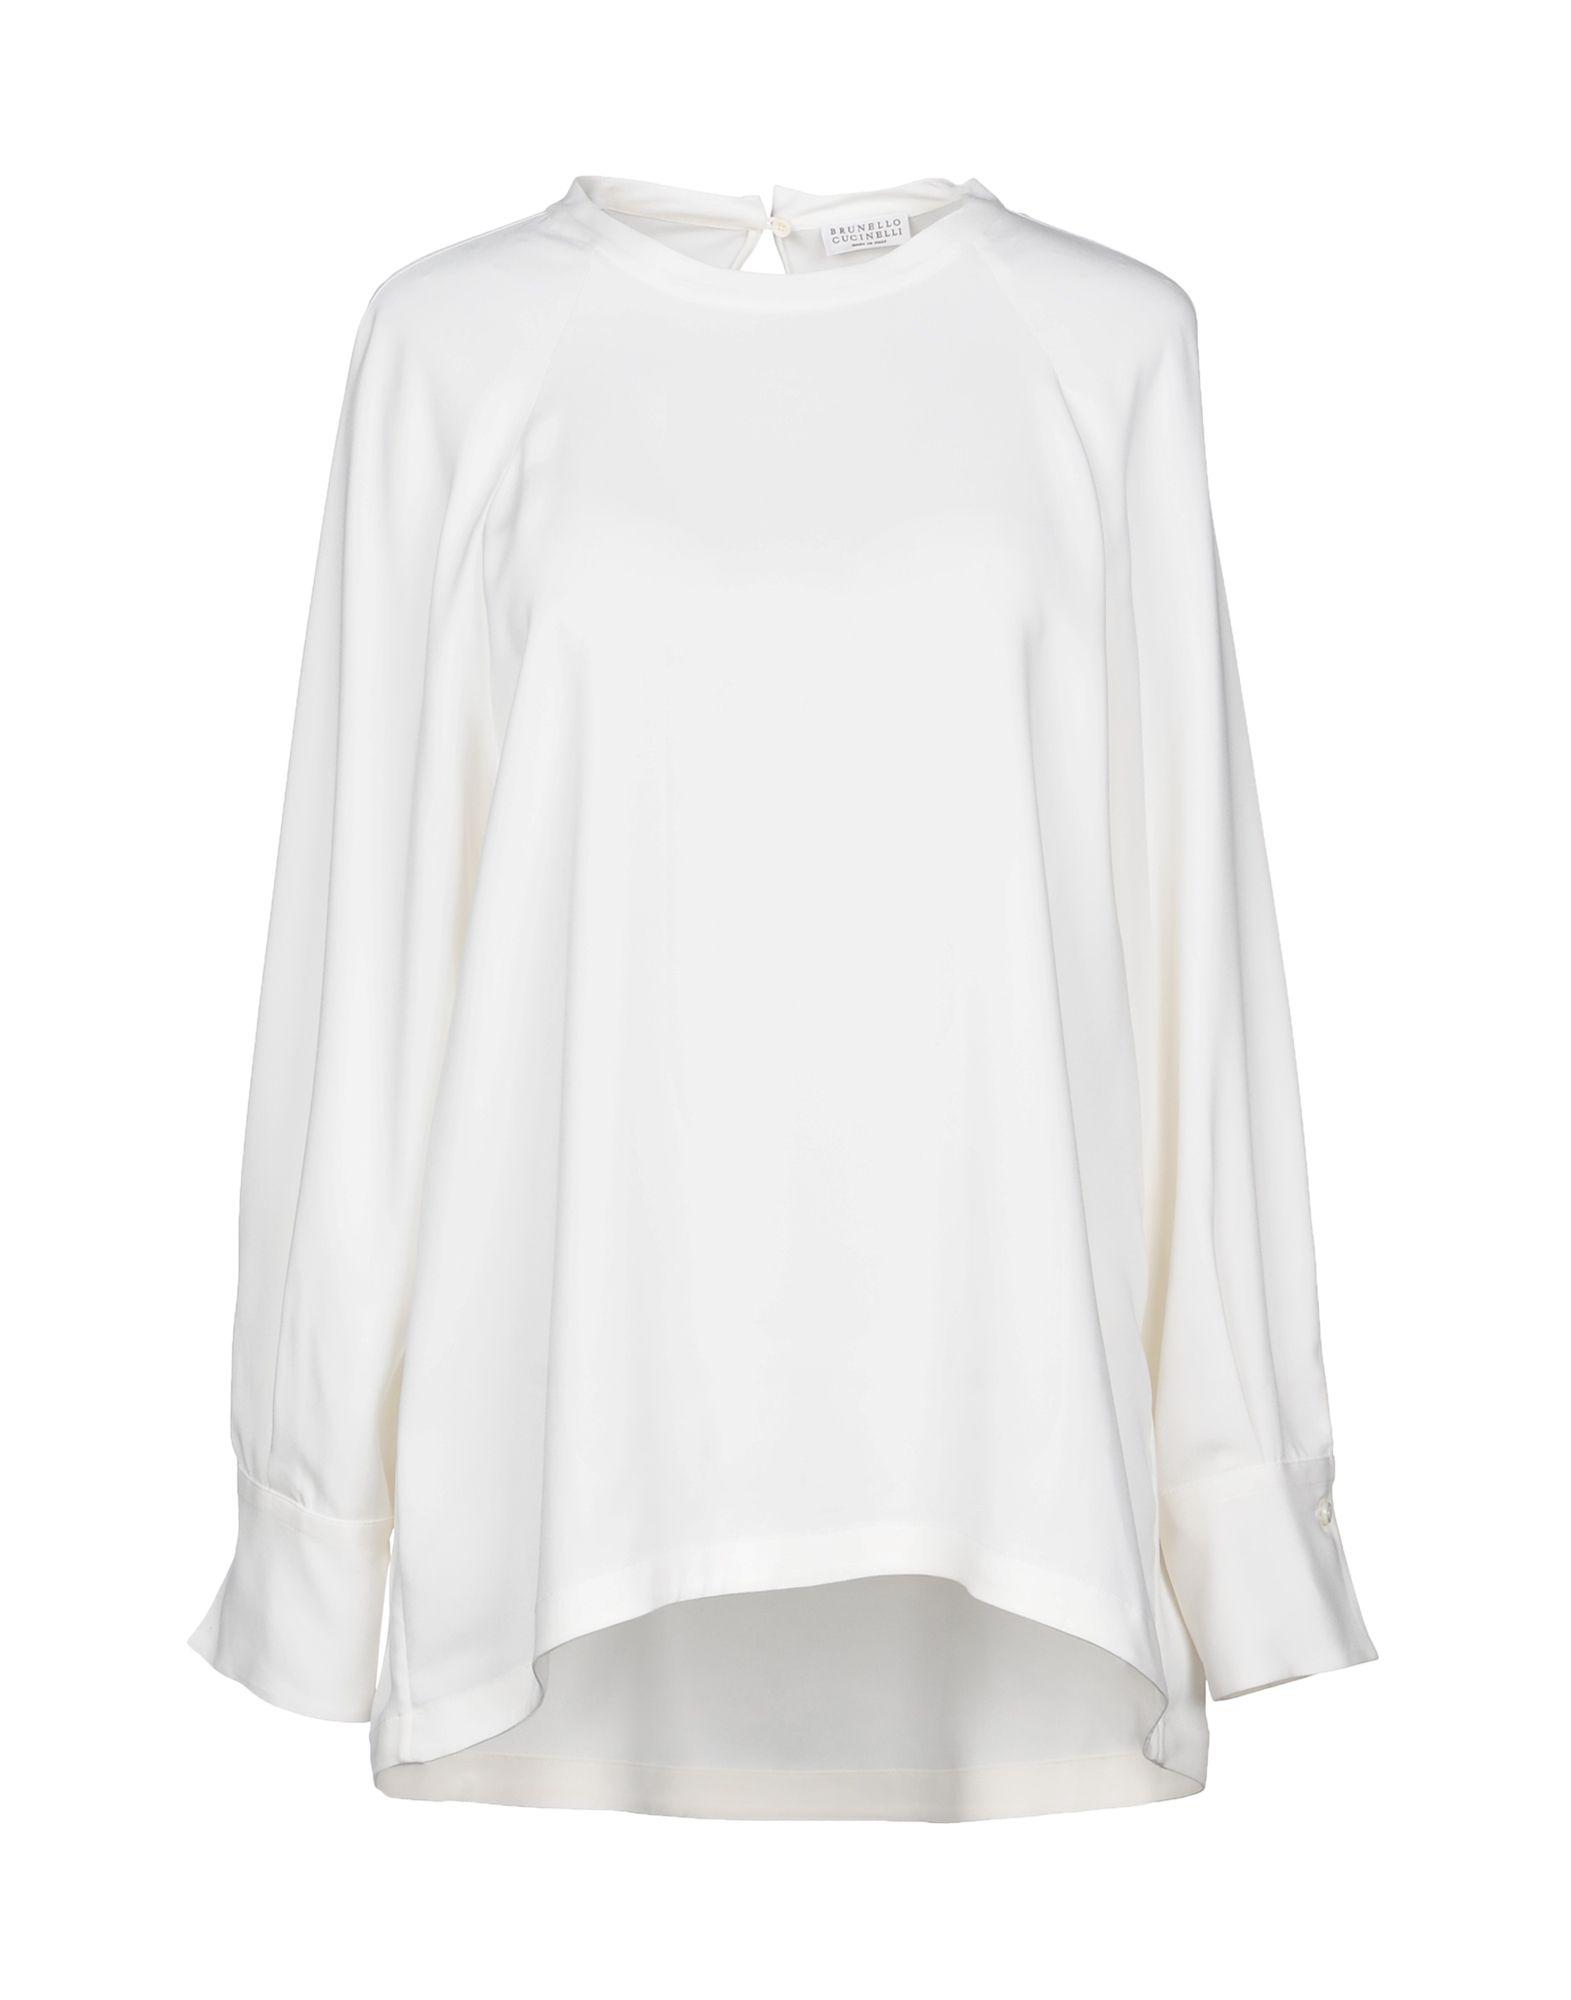 Brunello Cucinelli Synthetic Blouse in White - Lyst